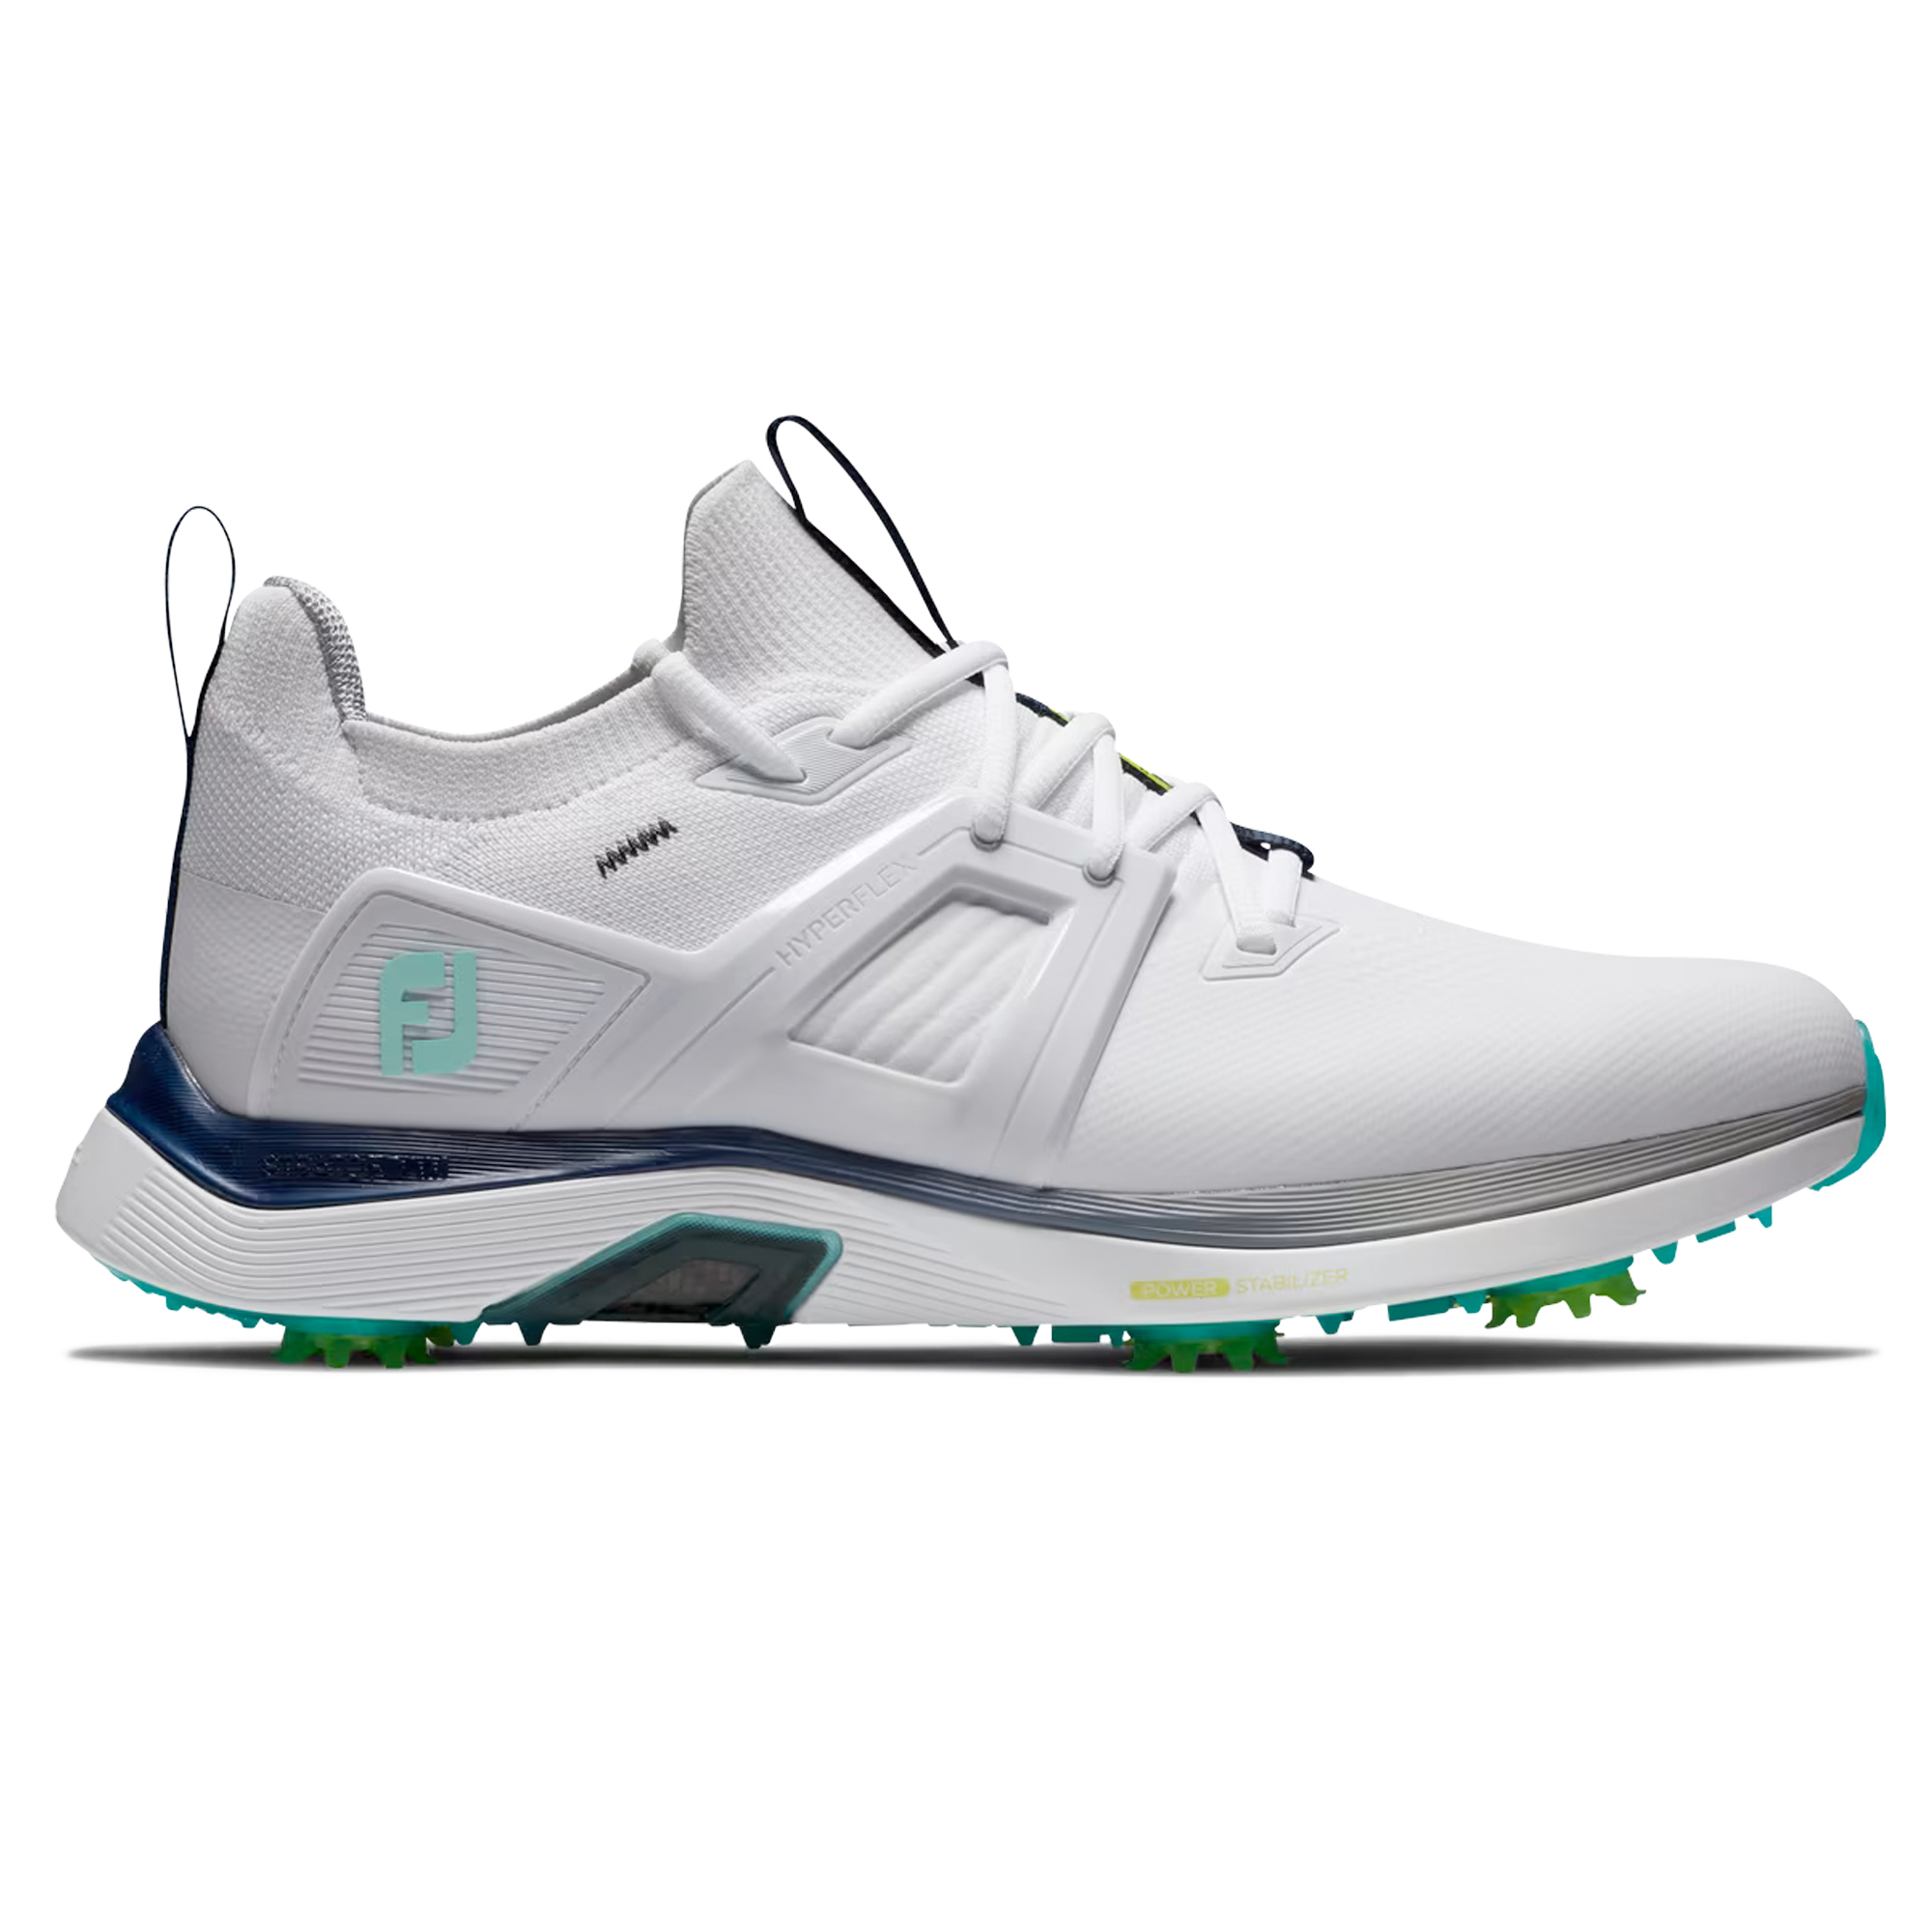 FootJoy Hyperflex Carbon Mens Spiked Golf Shoes  - White/Charcoal/Teal